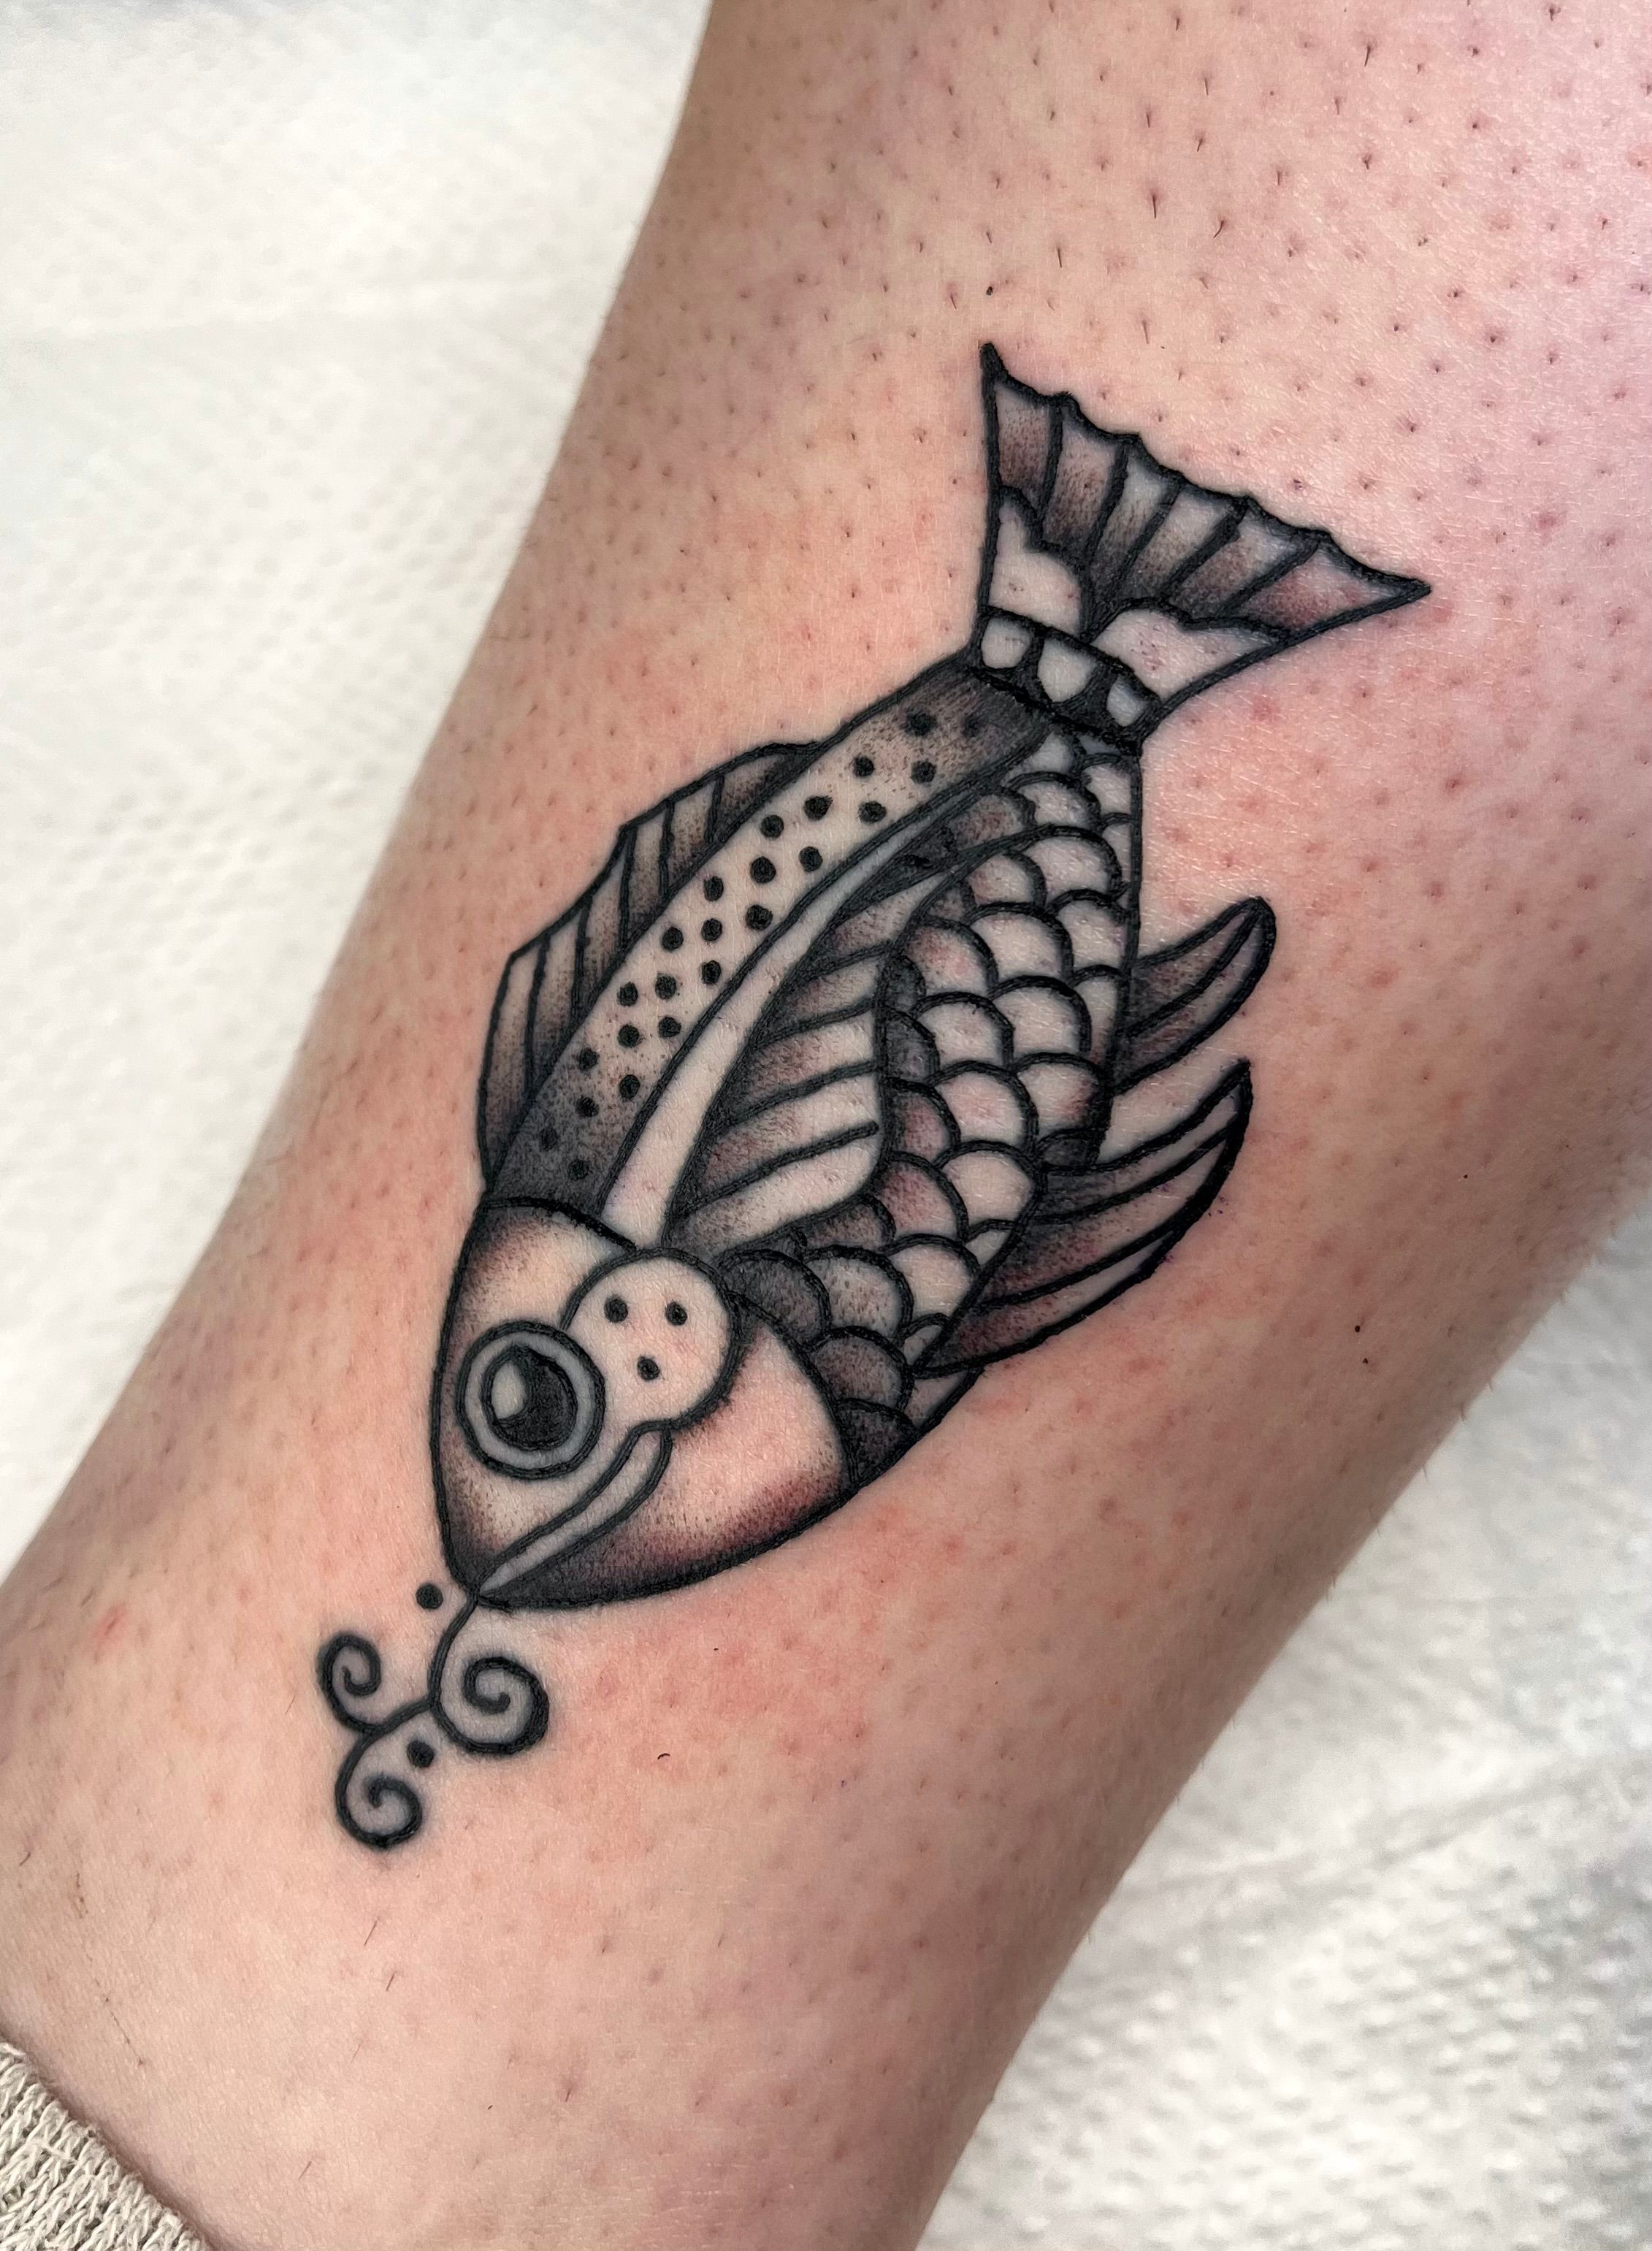 Koi fish tattoo located on the inner forearm, done in